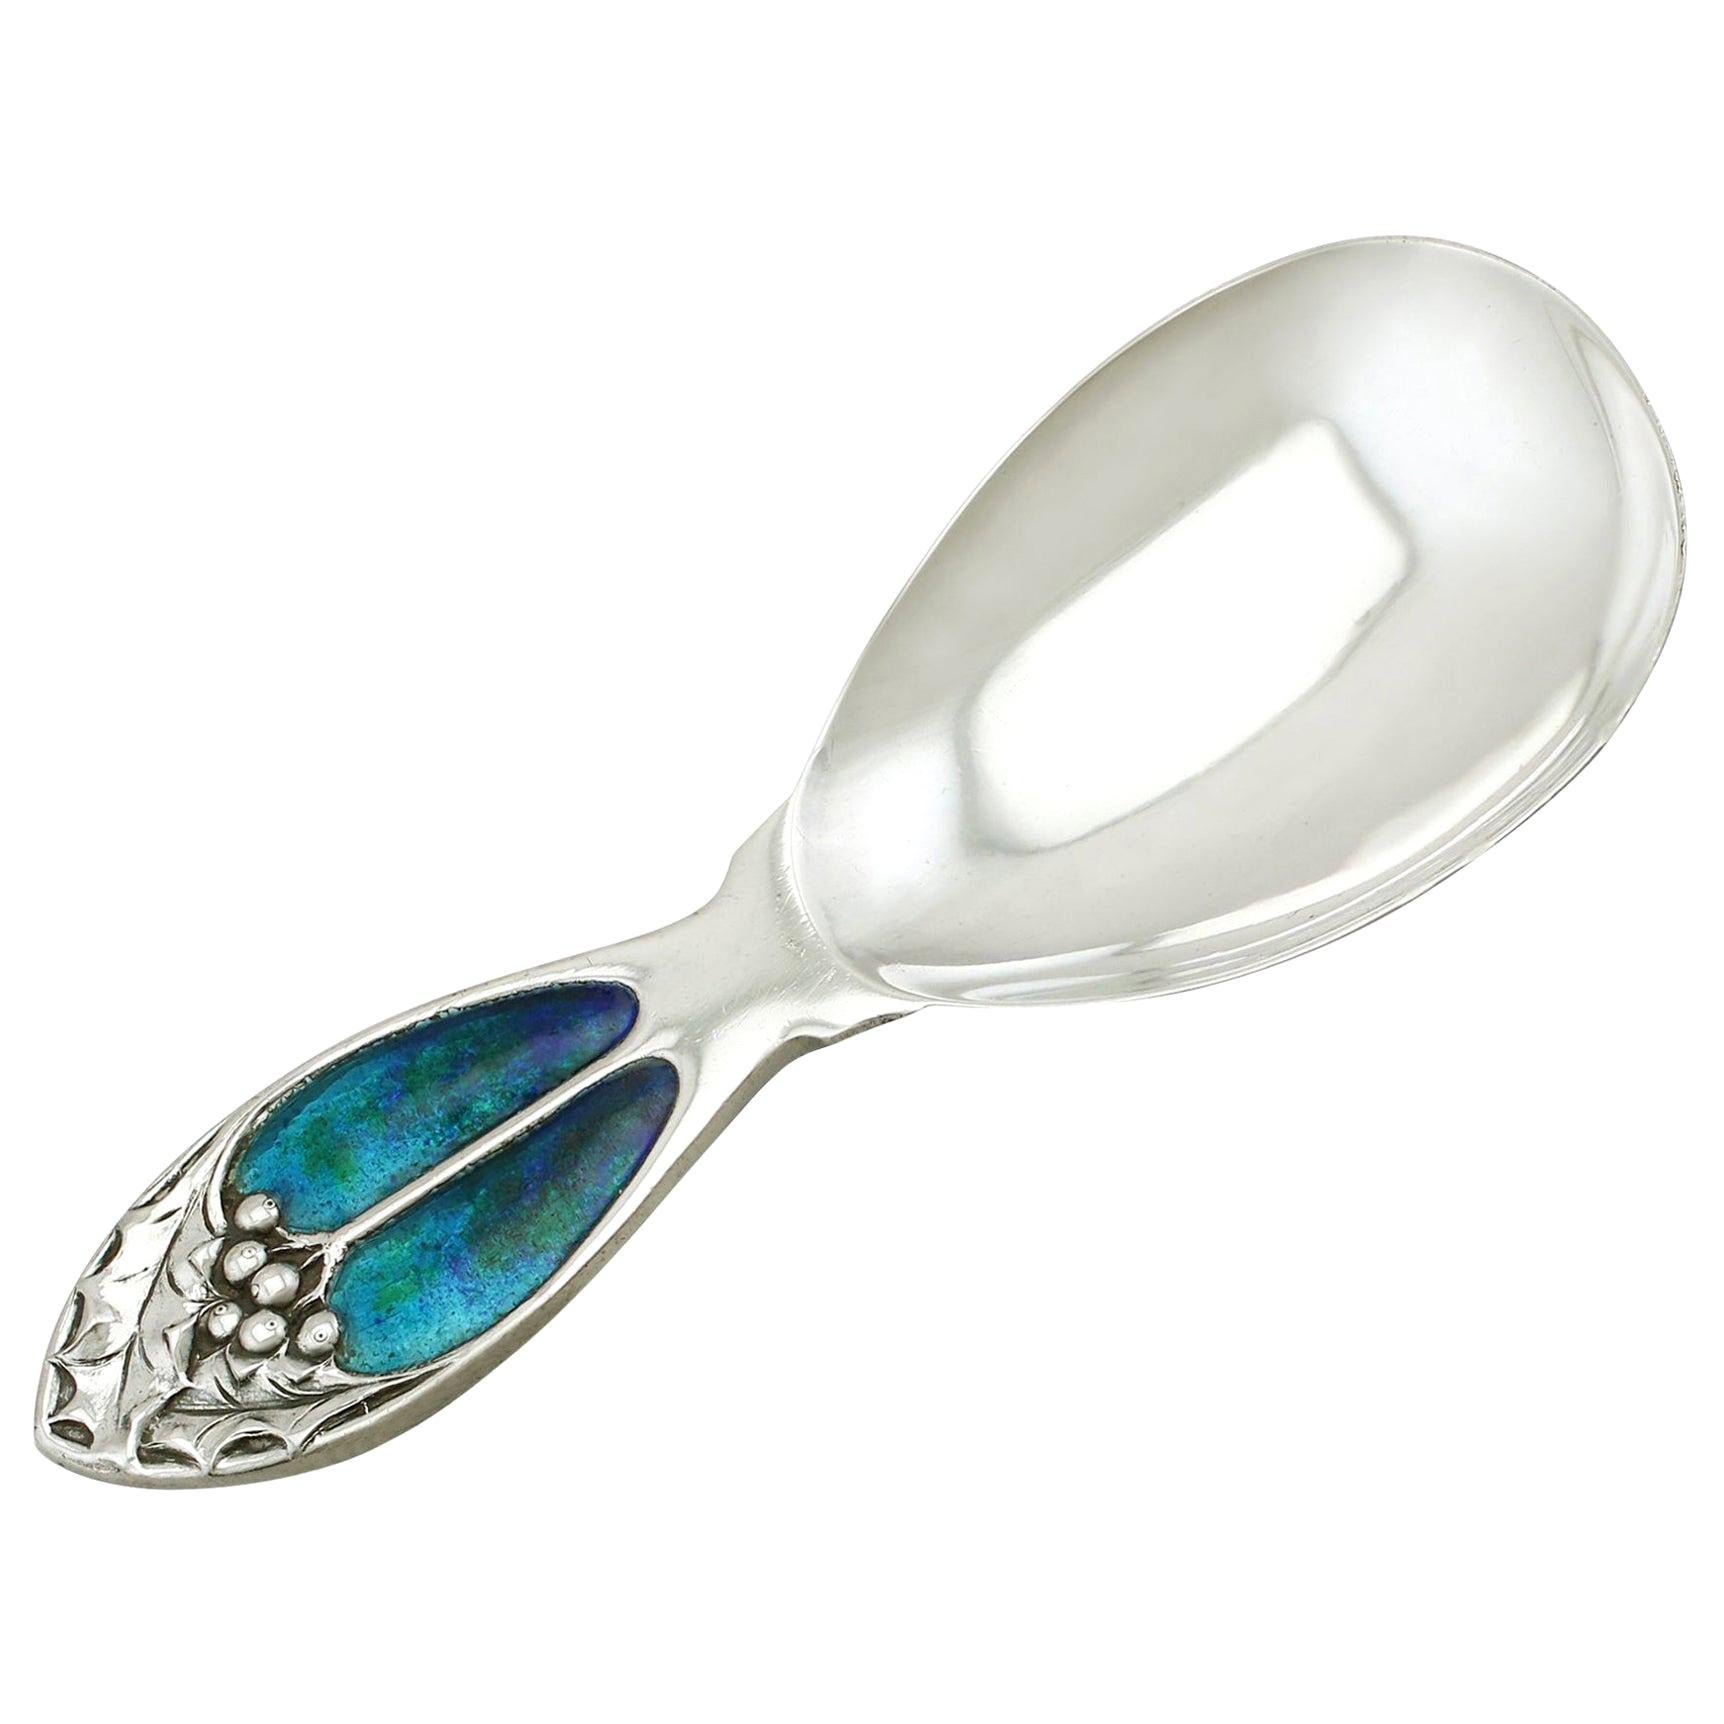 Antique Sterling Silver and Enamel Caddy Spoon